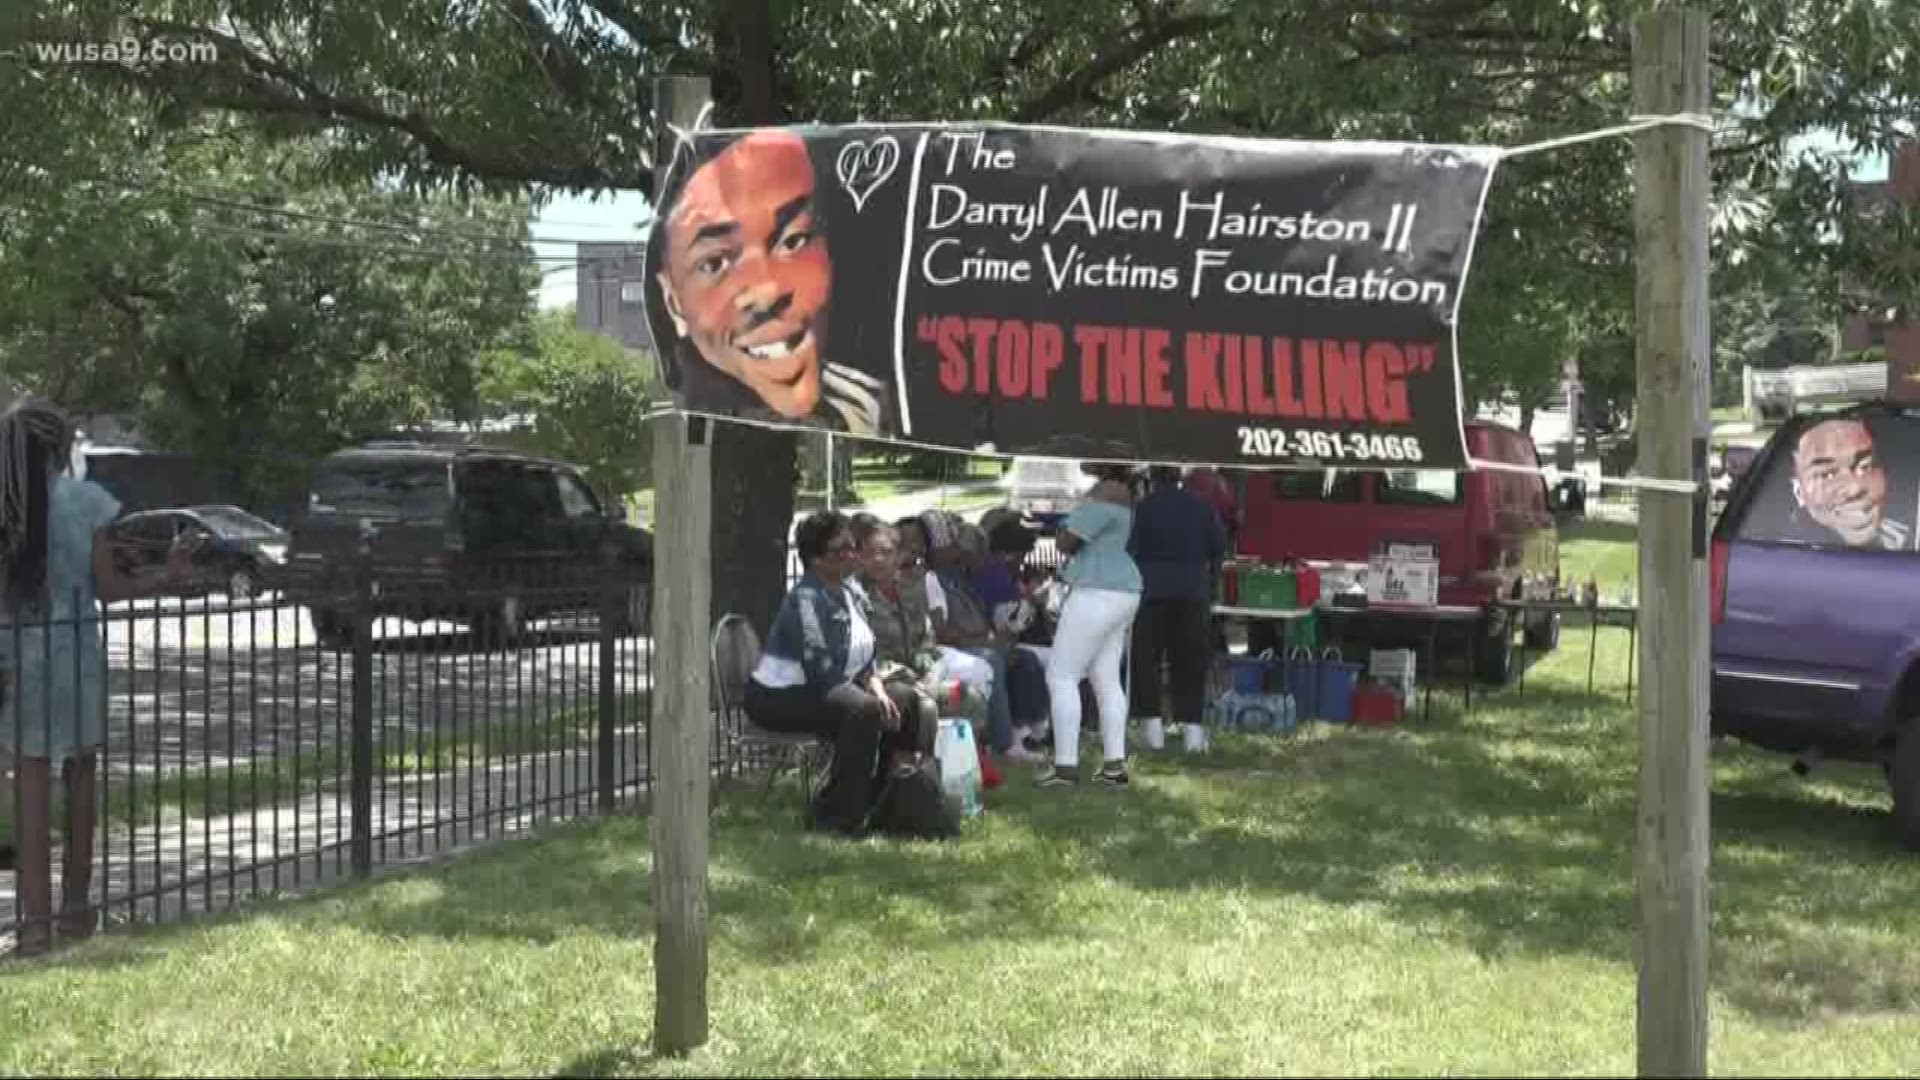 Families who've lost a loved one to gun violence came together in ward 8 on Saturday. The gathering was meant to remind people they're not alone and raise awareness to the impact gun violence has on local communities.